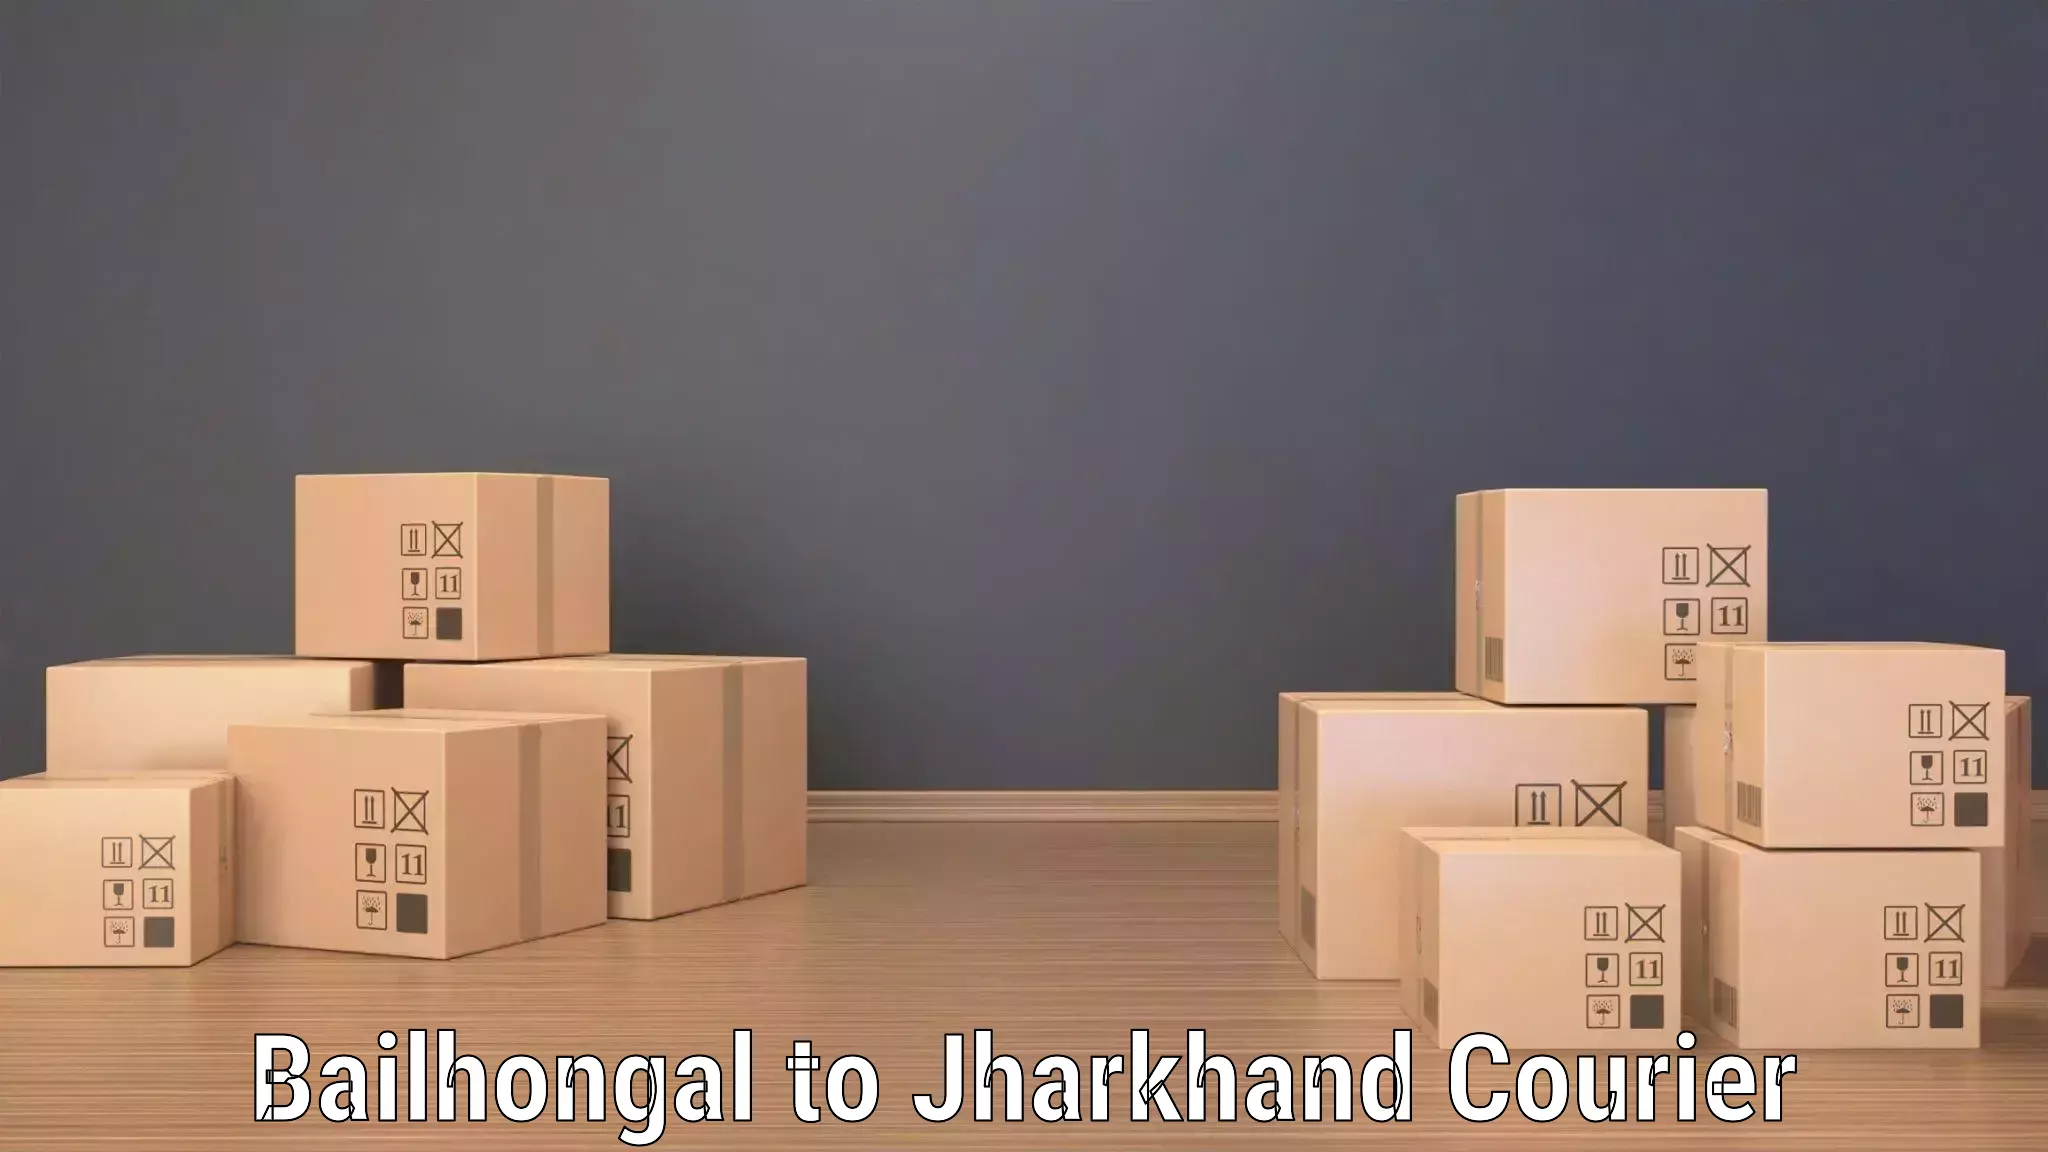 Package delivery network Bailhongal to Rangalia